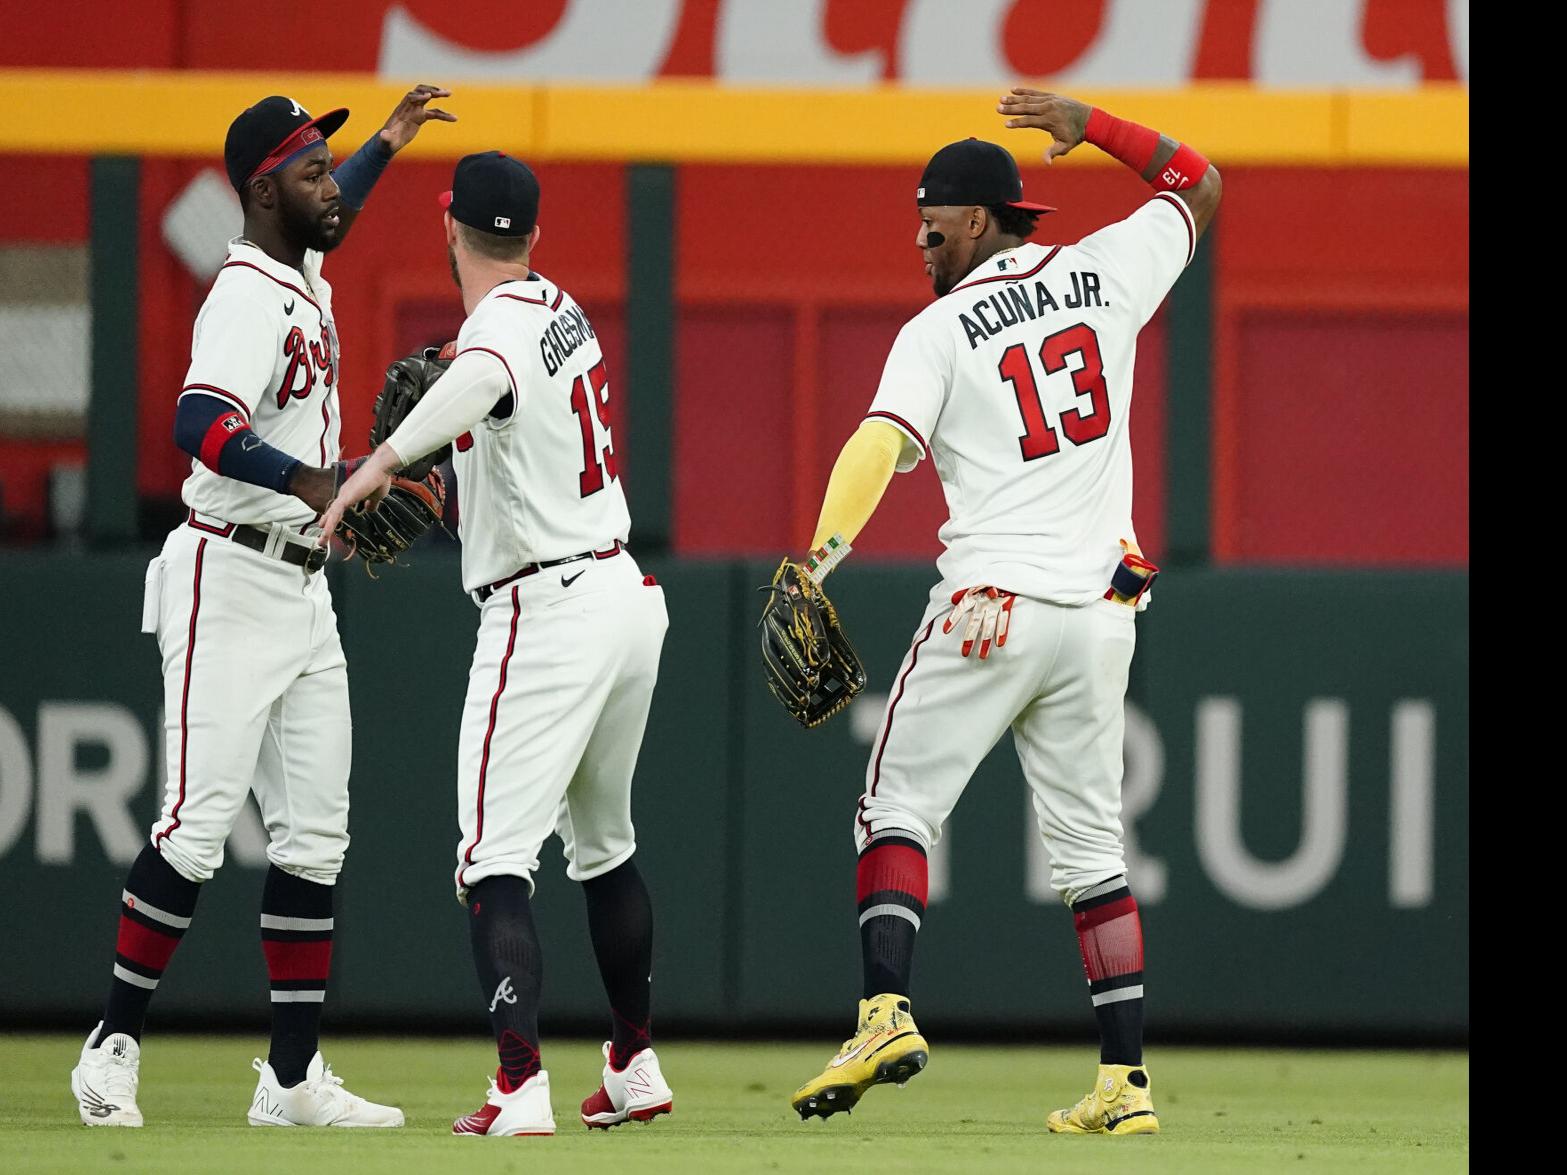 Atlanta Braves agree to 8-year, $168 million contract with first